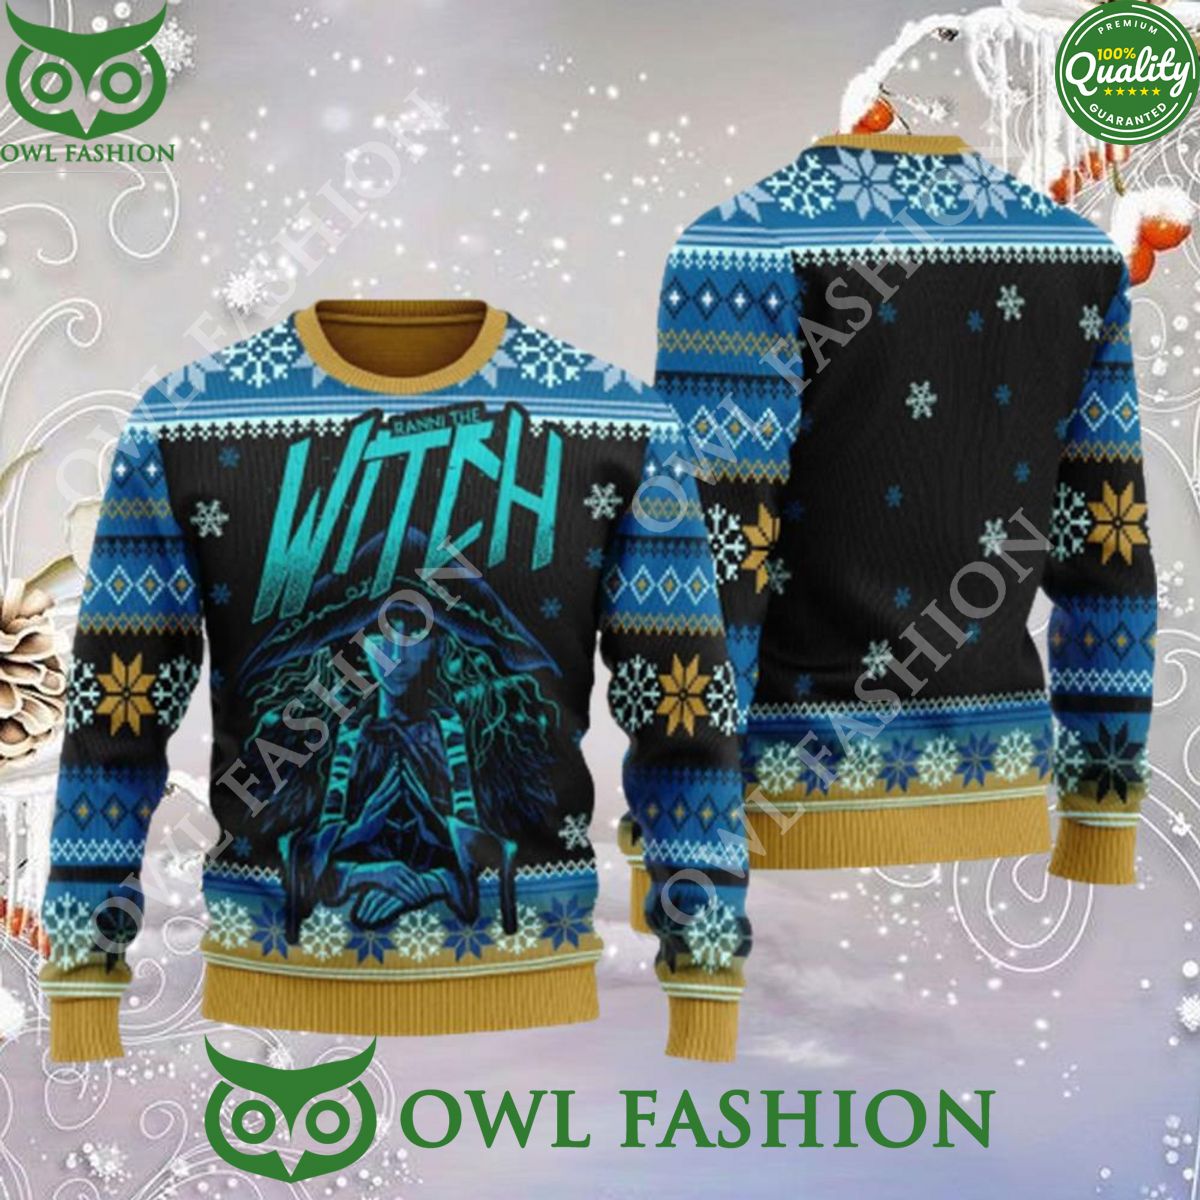 witch elden ring game the socerist unisex ugly christmas sweater 1 ySNwb.jpg